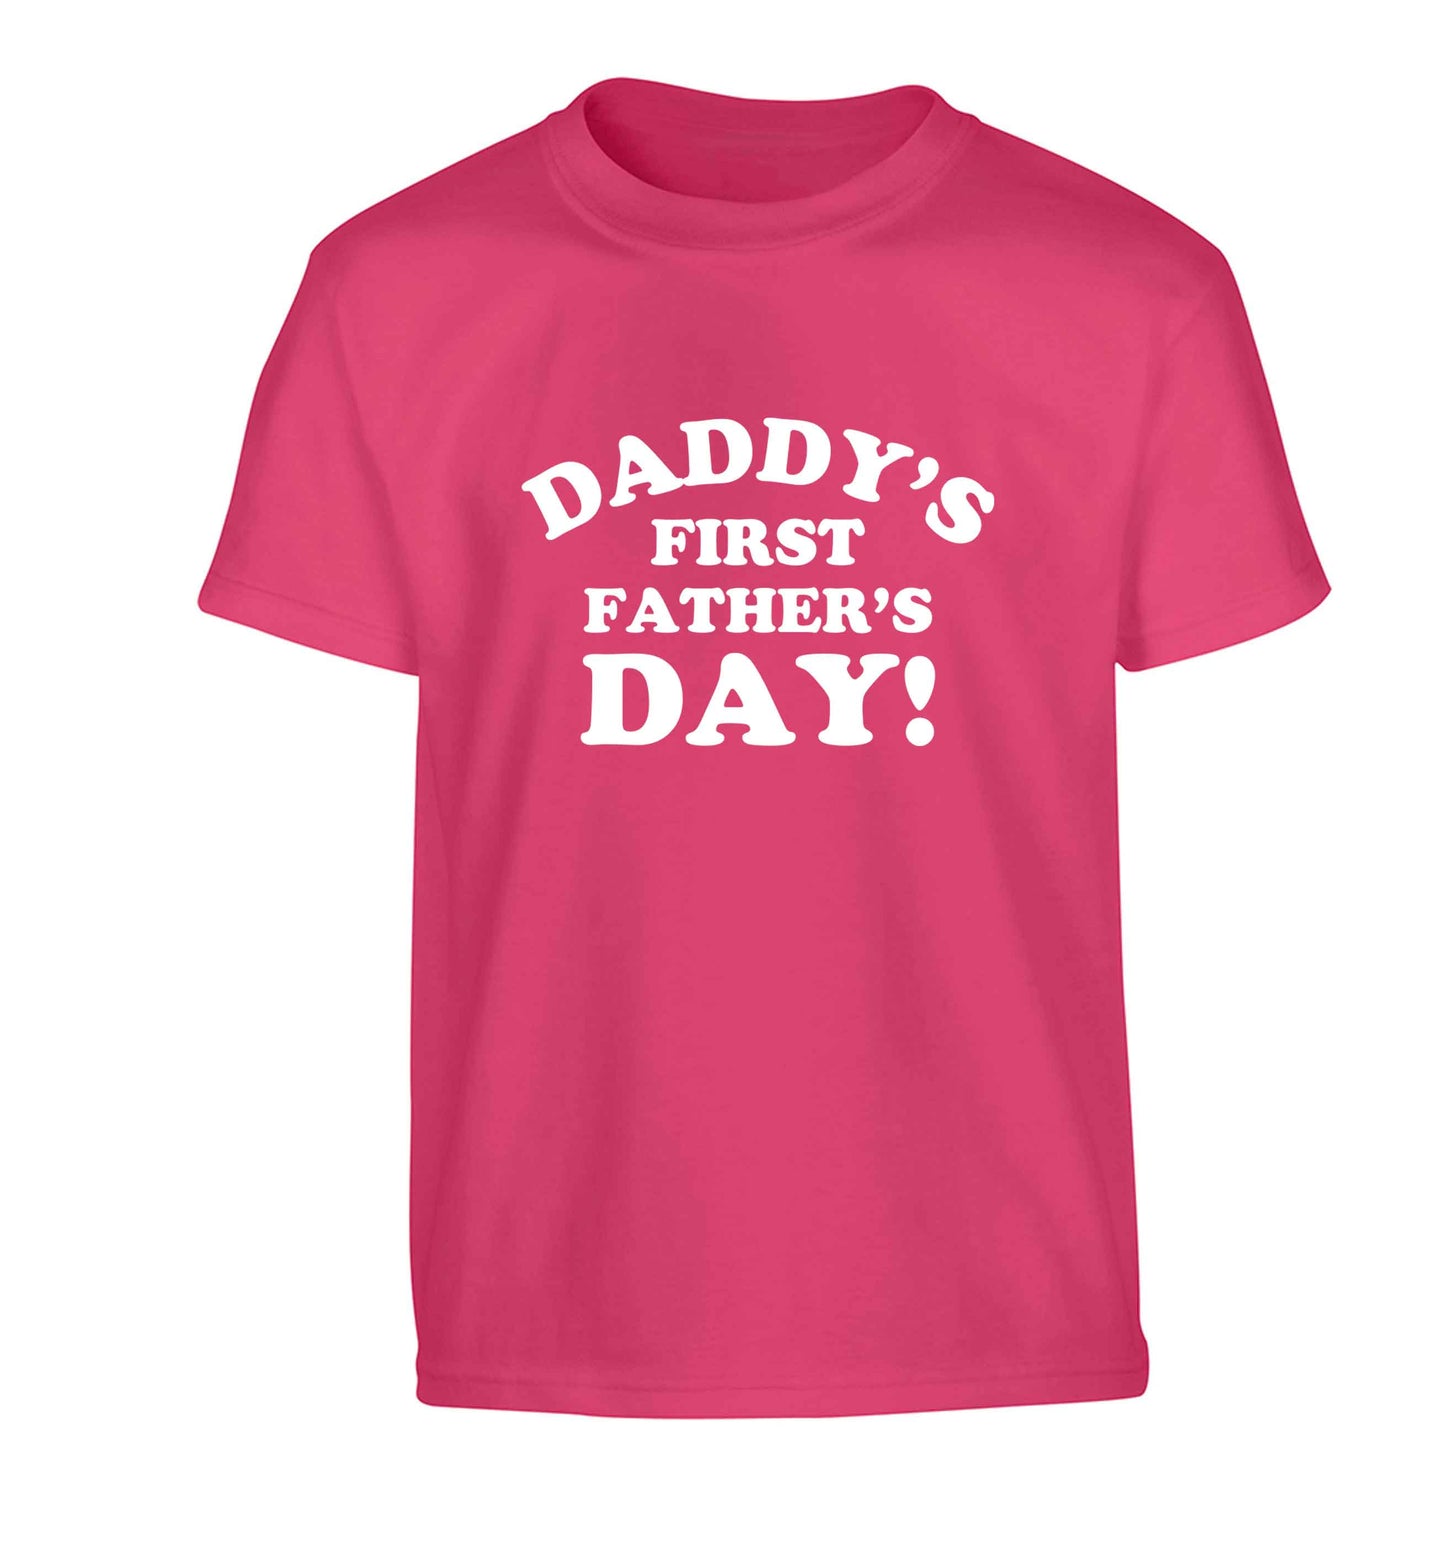 Daddy's first father's day Children's pink Tshirt 12-13 Years